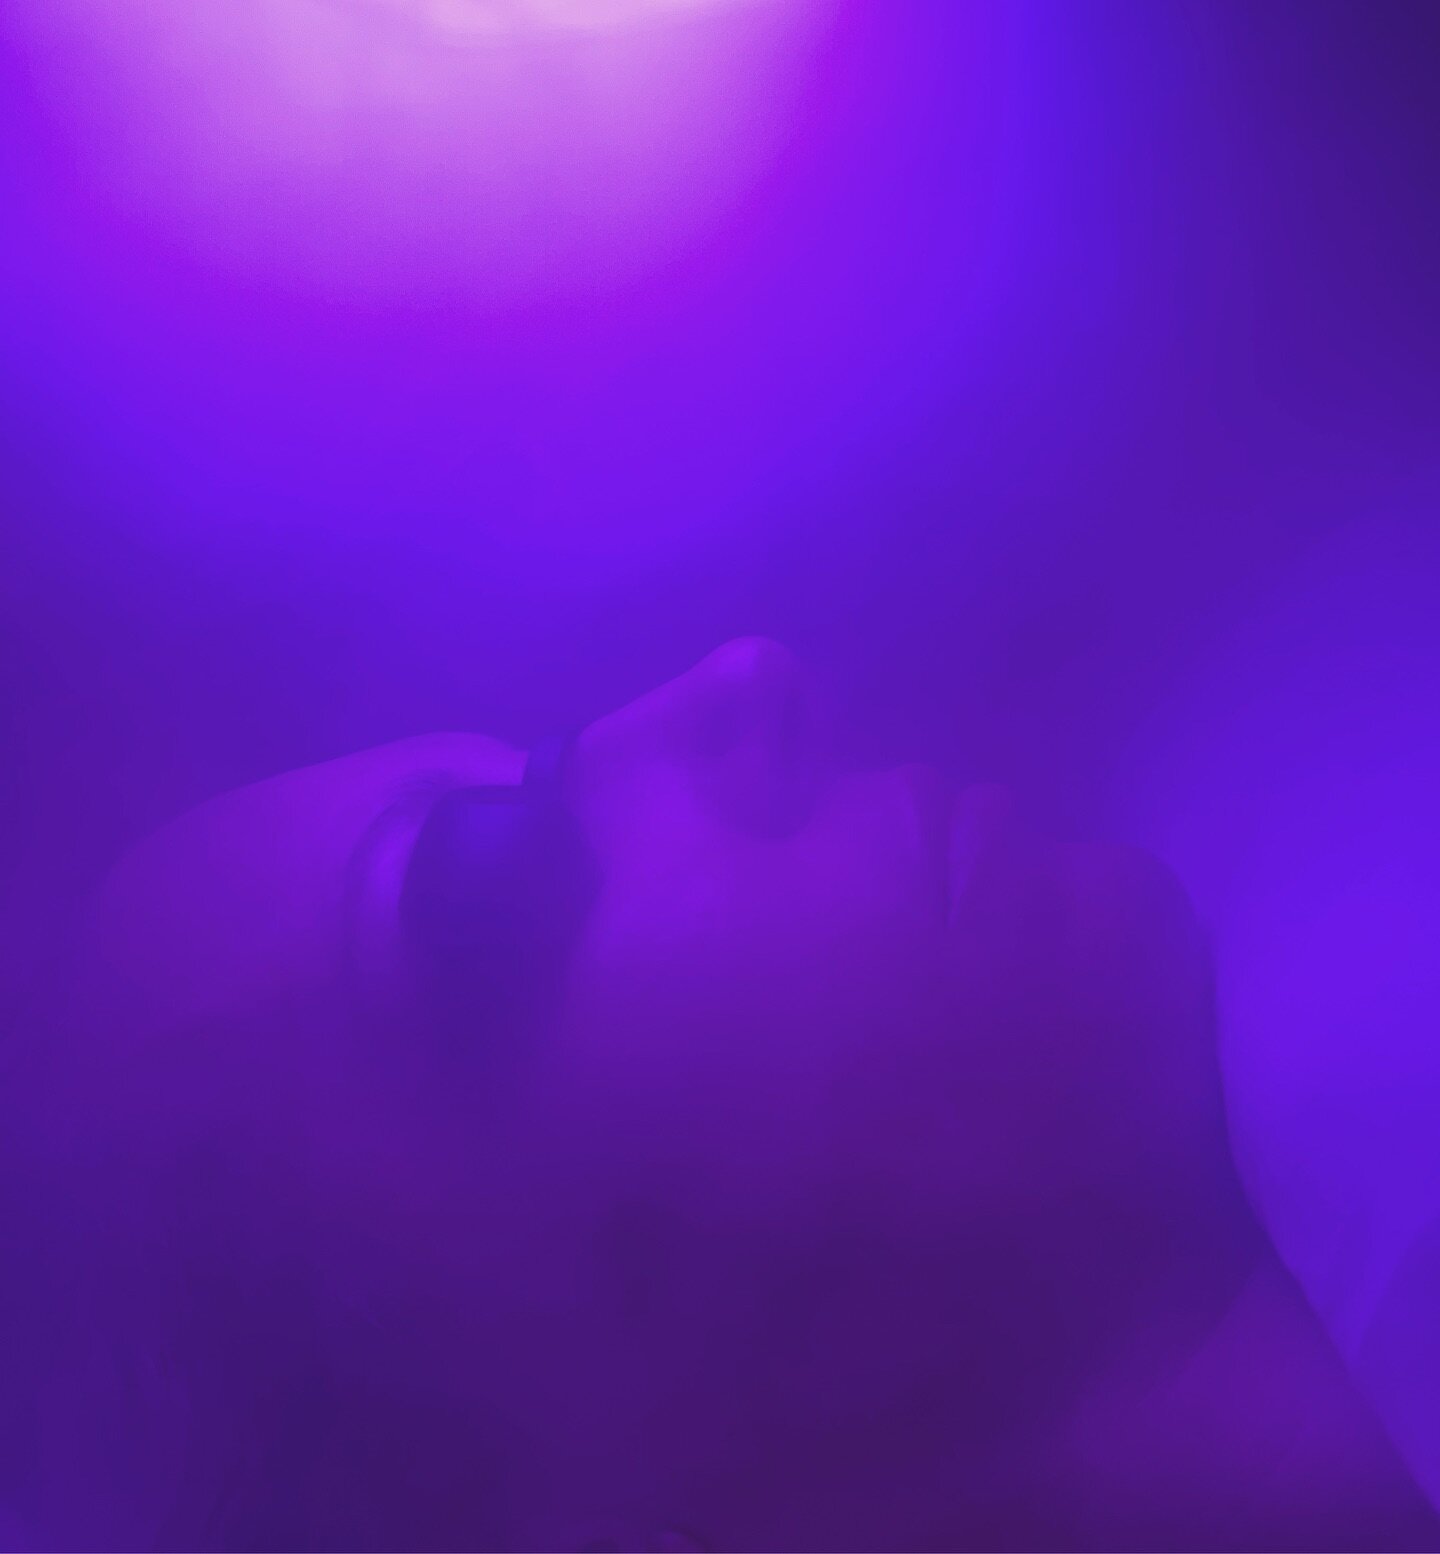 Violet LED Light or an aura photo?! I love both! Violet LED is lovely for the skin. It reduces inflammation, helps eliminate toxins, stimulates collagen and helps evens out skin tone. 

Auras are the small electromagnetic field emitted by all living 